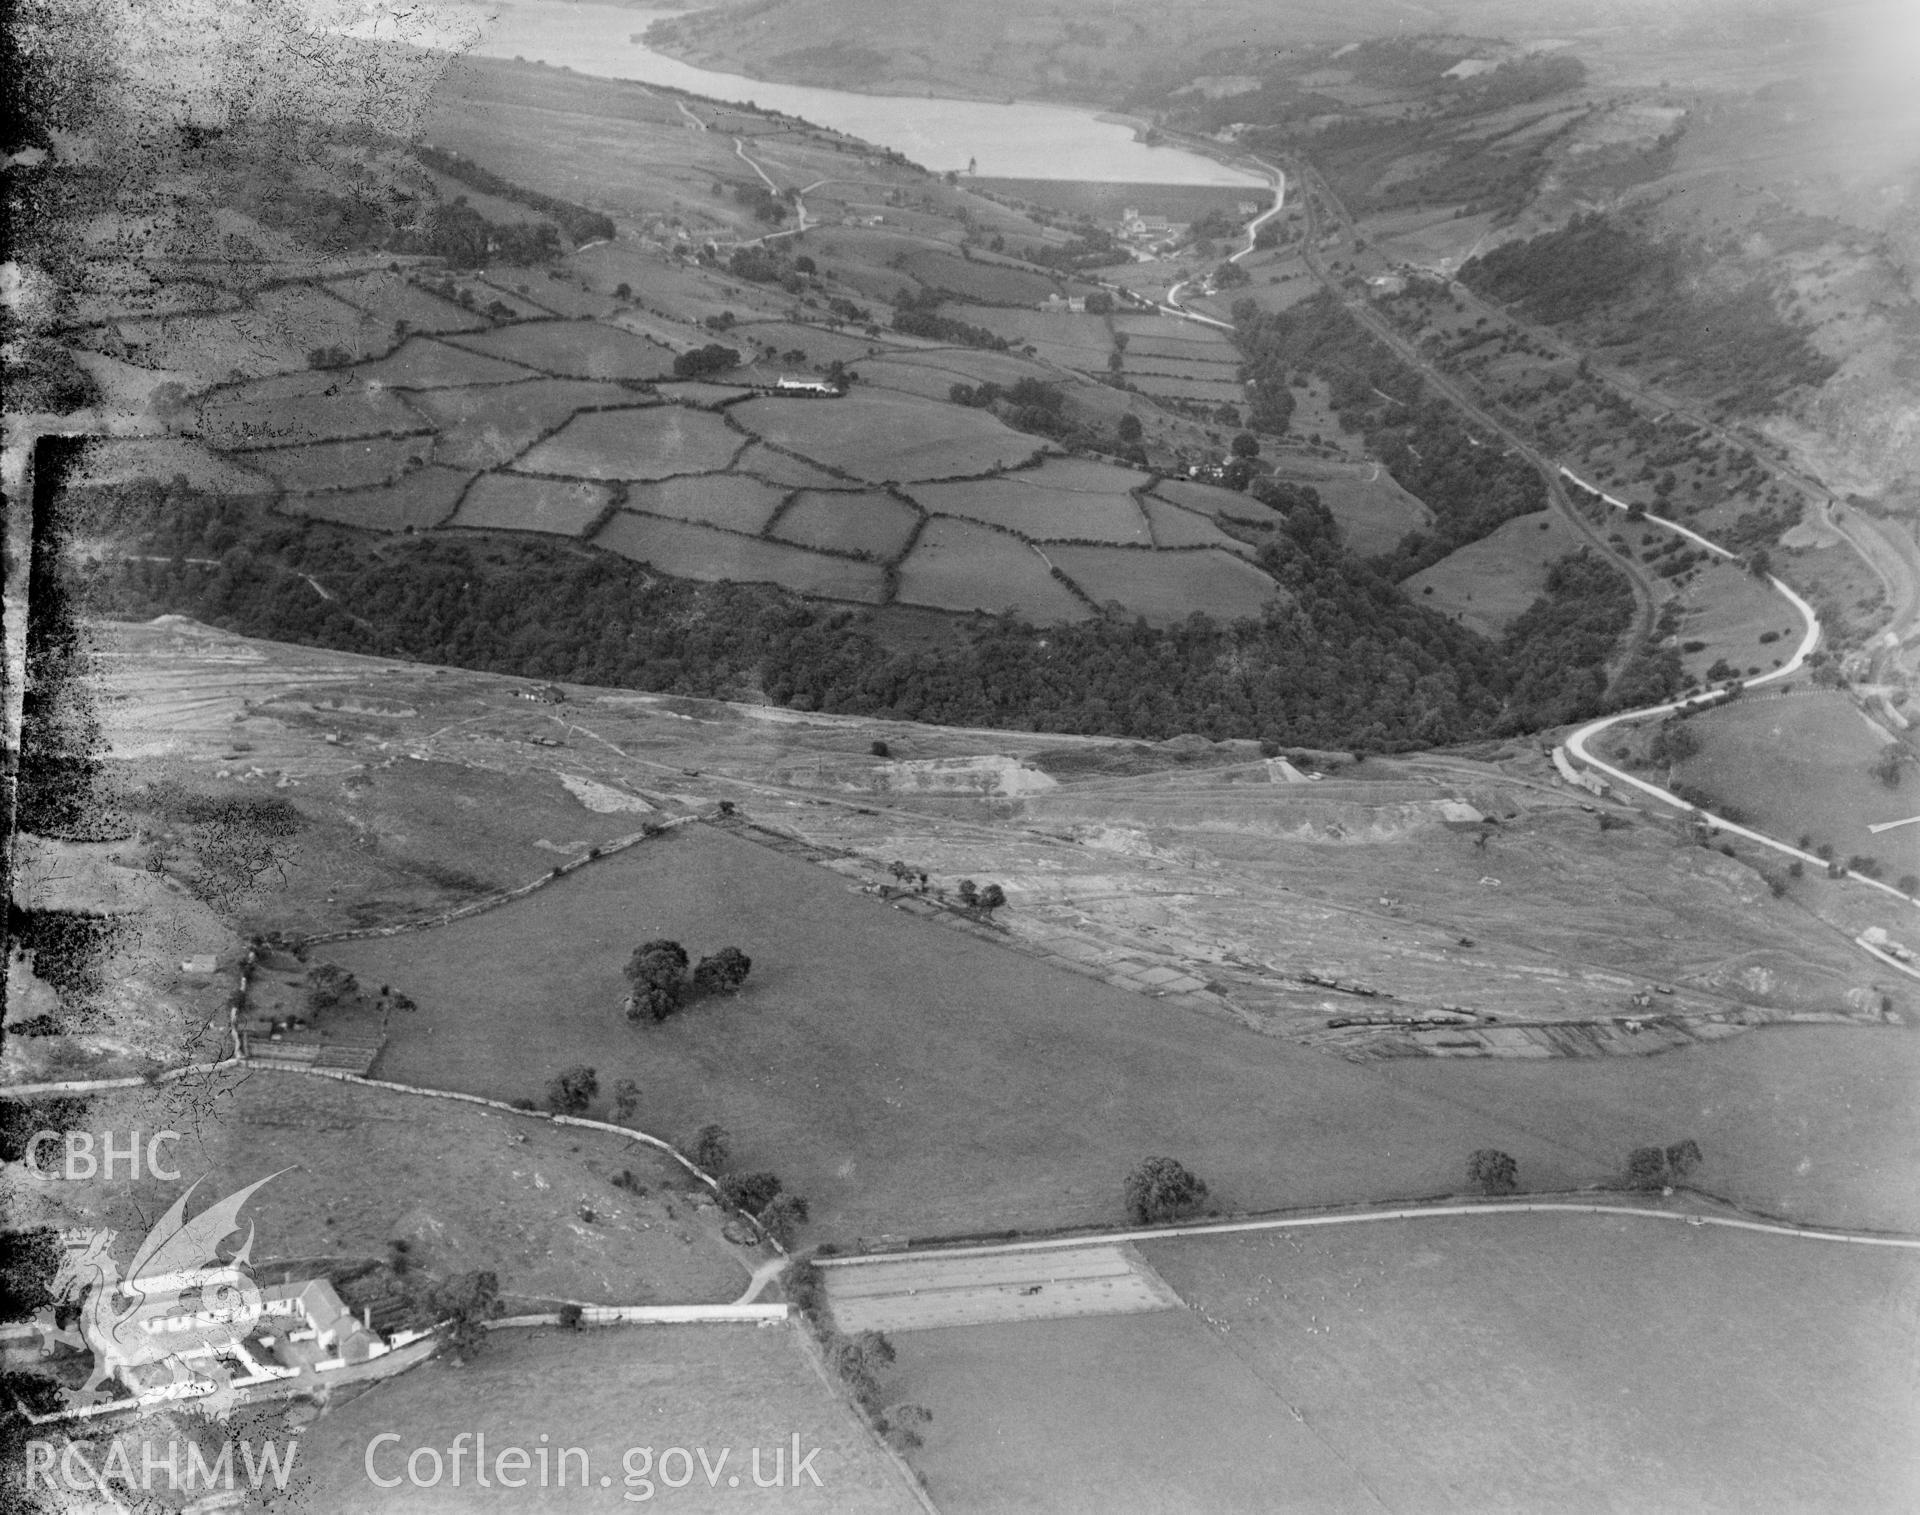 View showing Castle Farm, looking north from above Morlais Castle Golf Club to the Taff Fechan Reservoir, oblique aerial view. 5?x4? black and white glass plate negative.